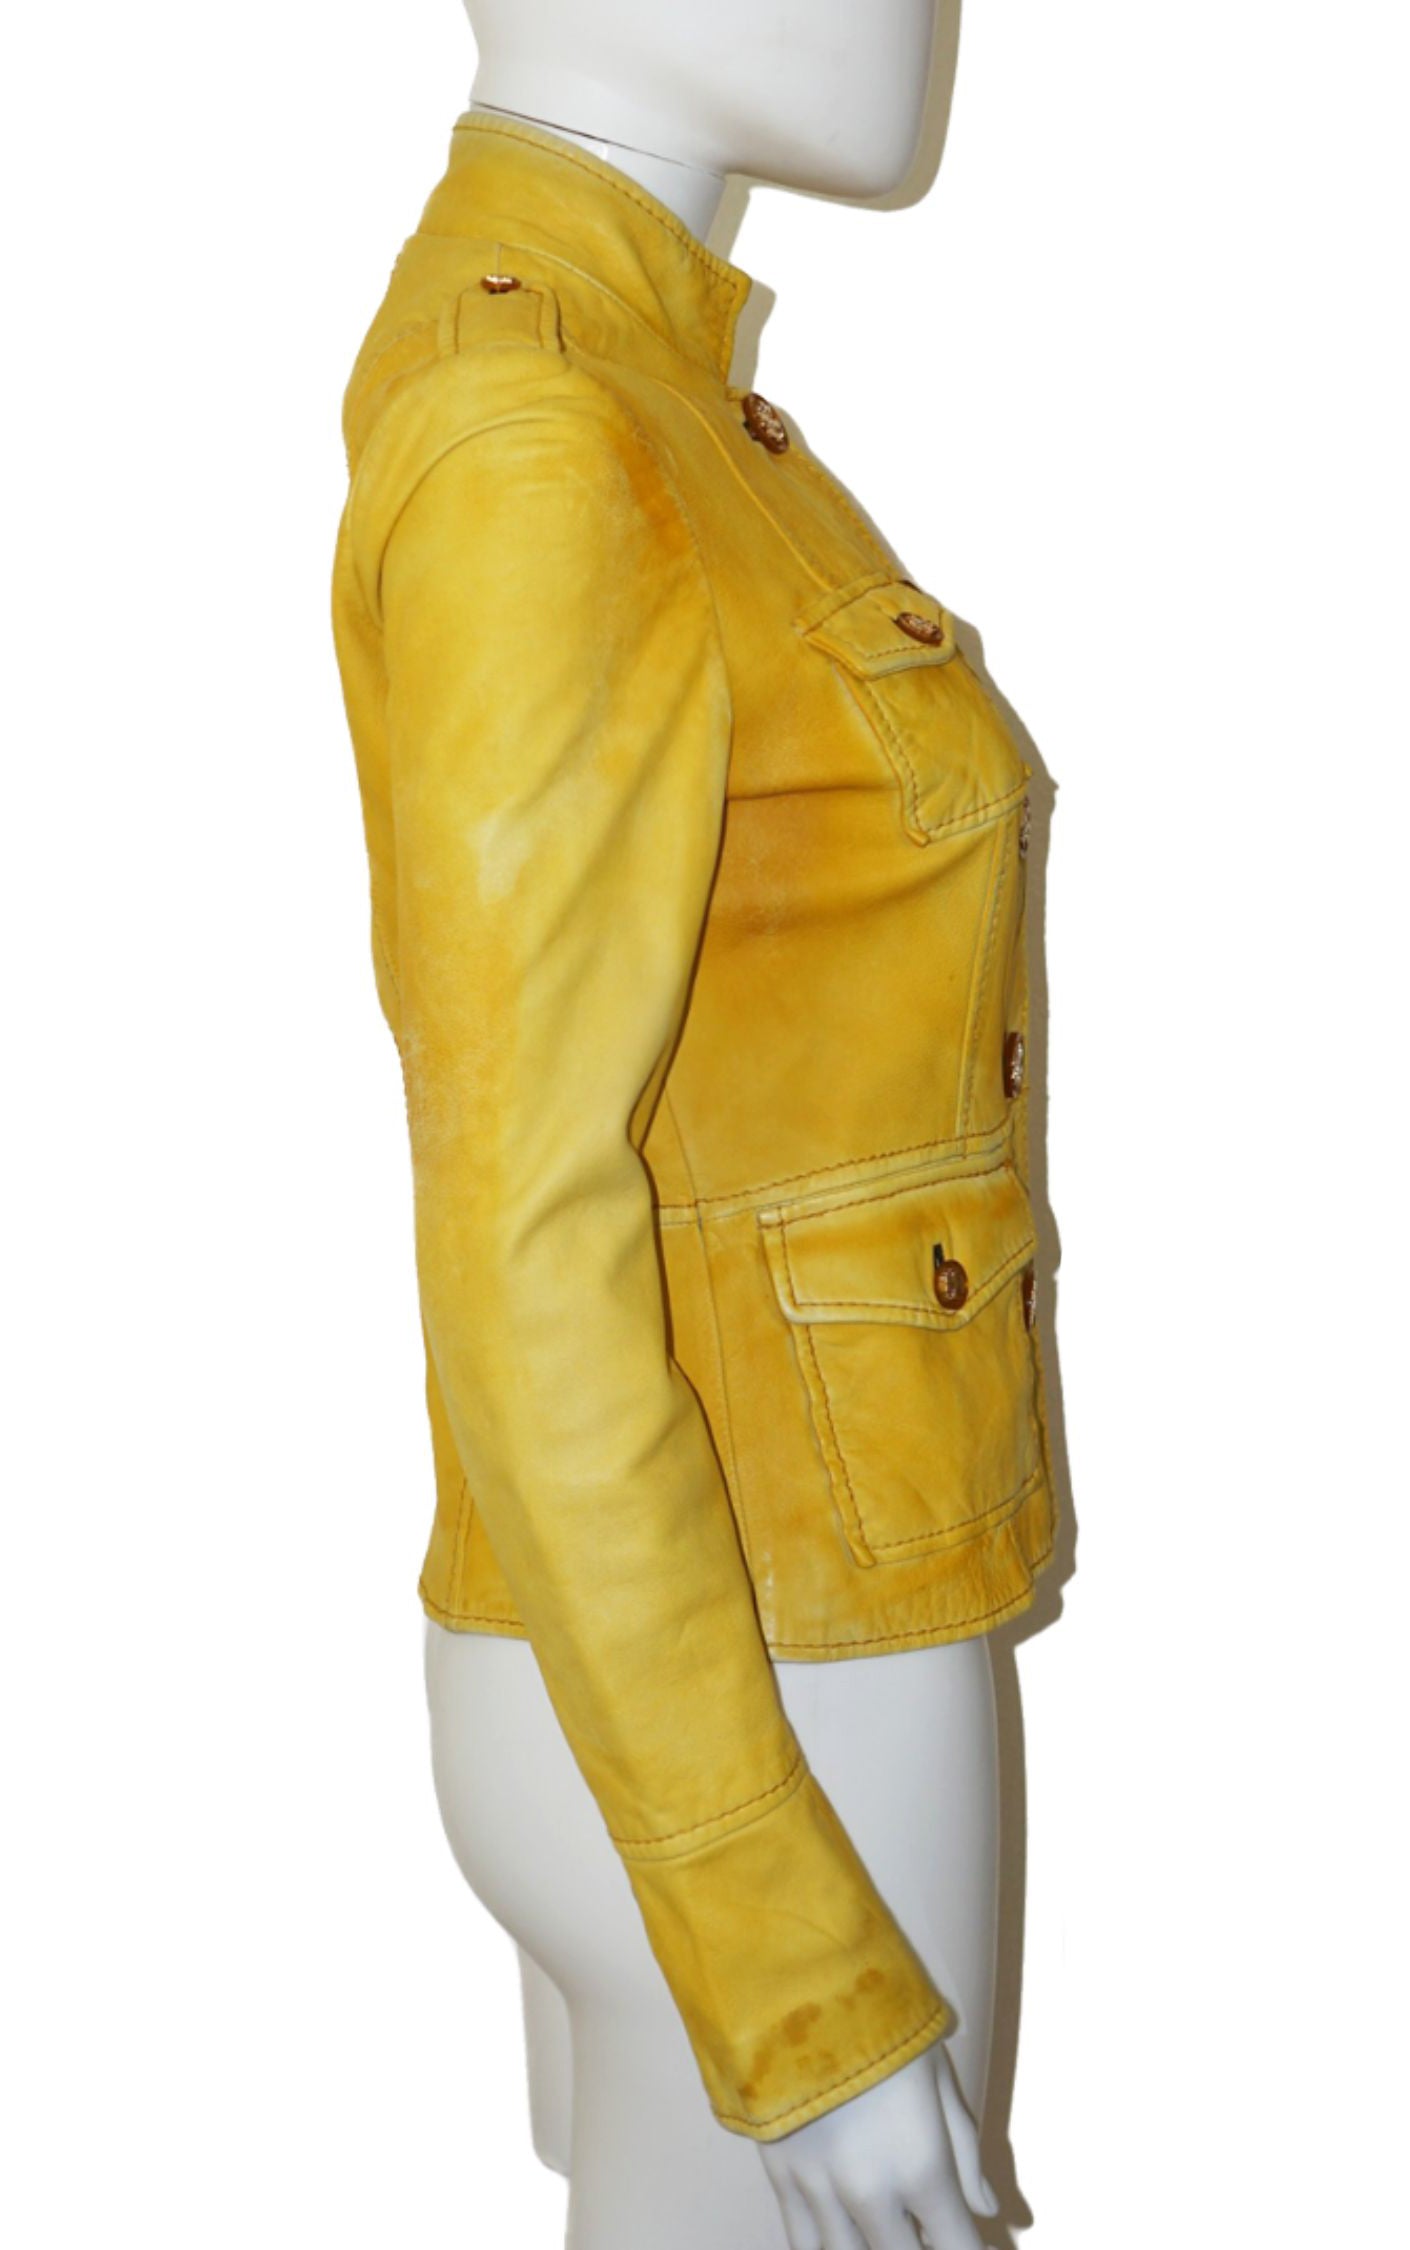 TORY BURCH Yellow Leather Buttoned Jacket resellum